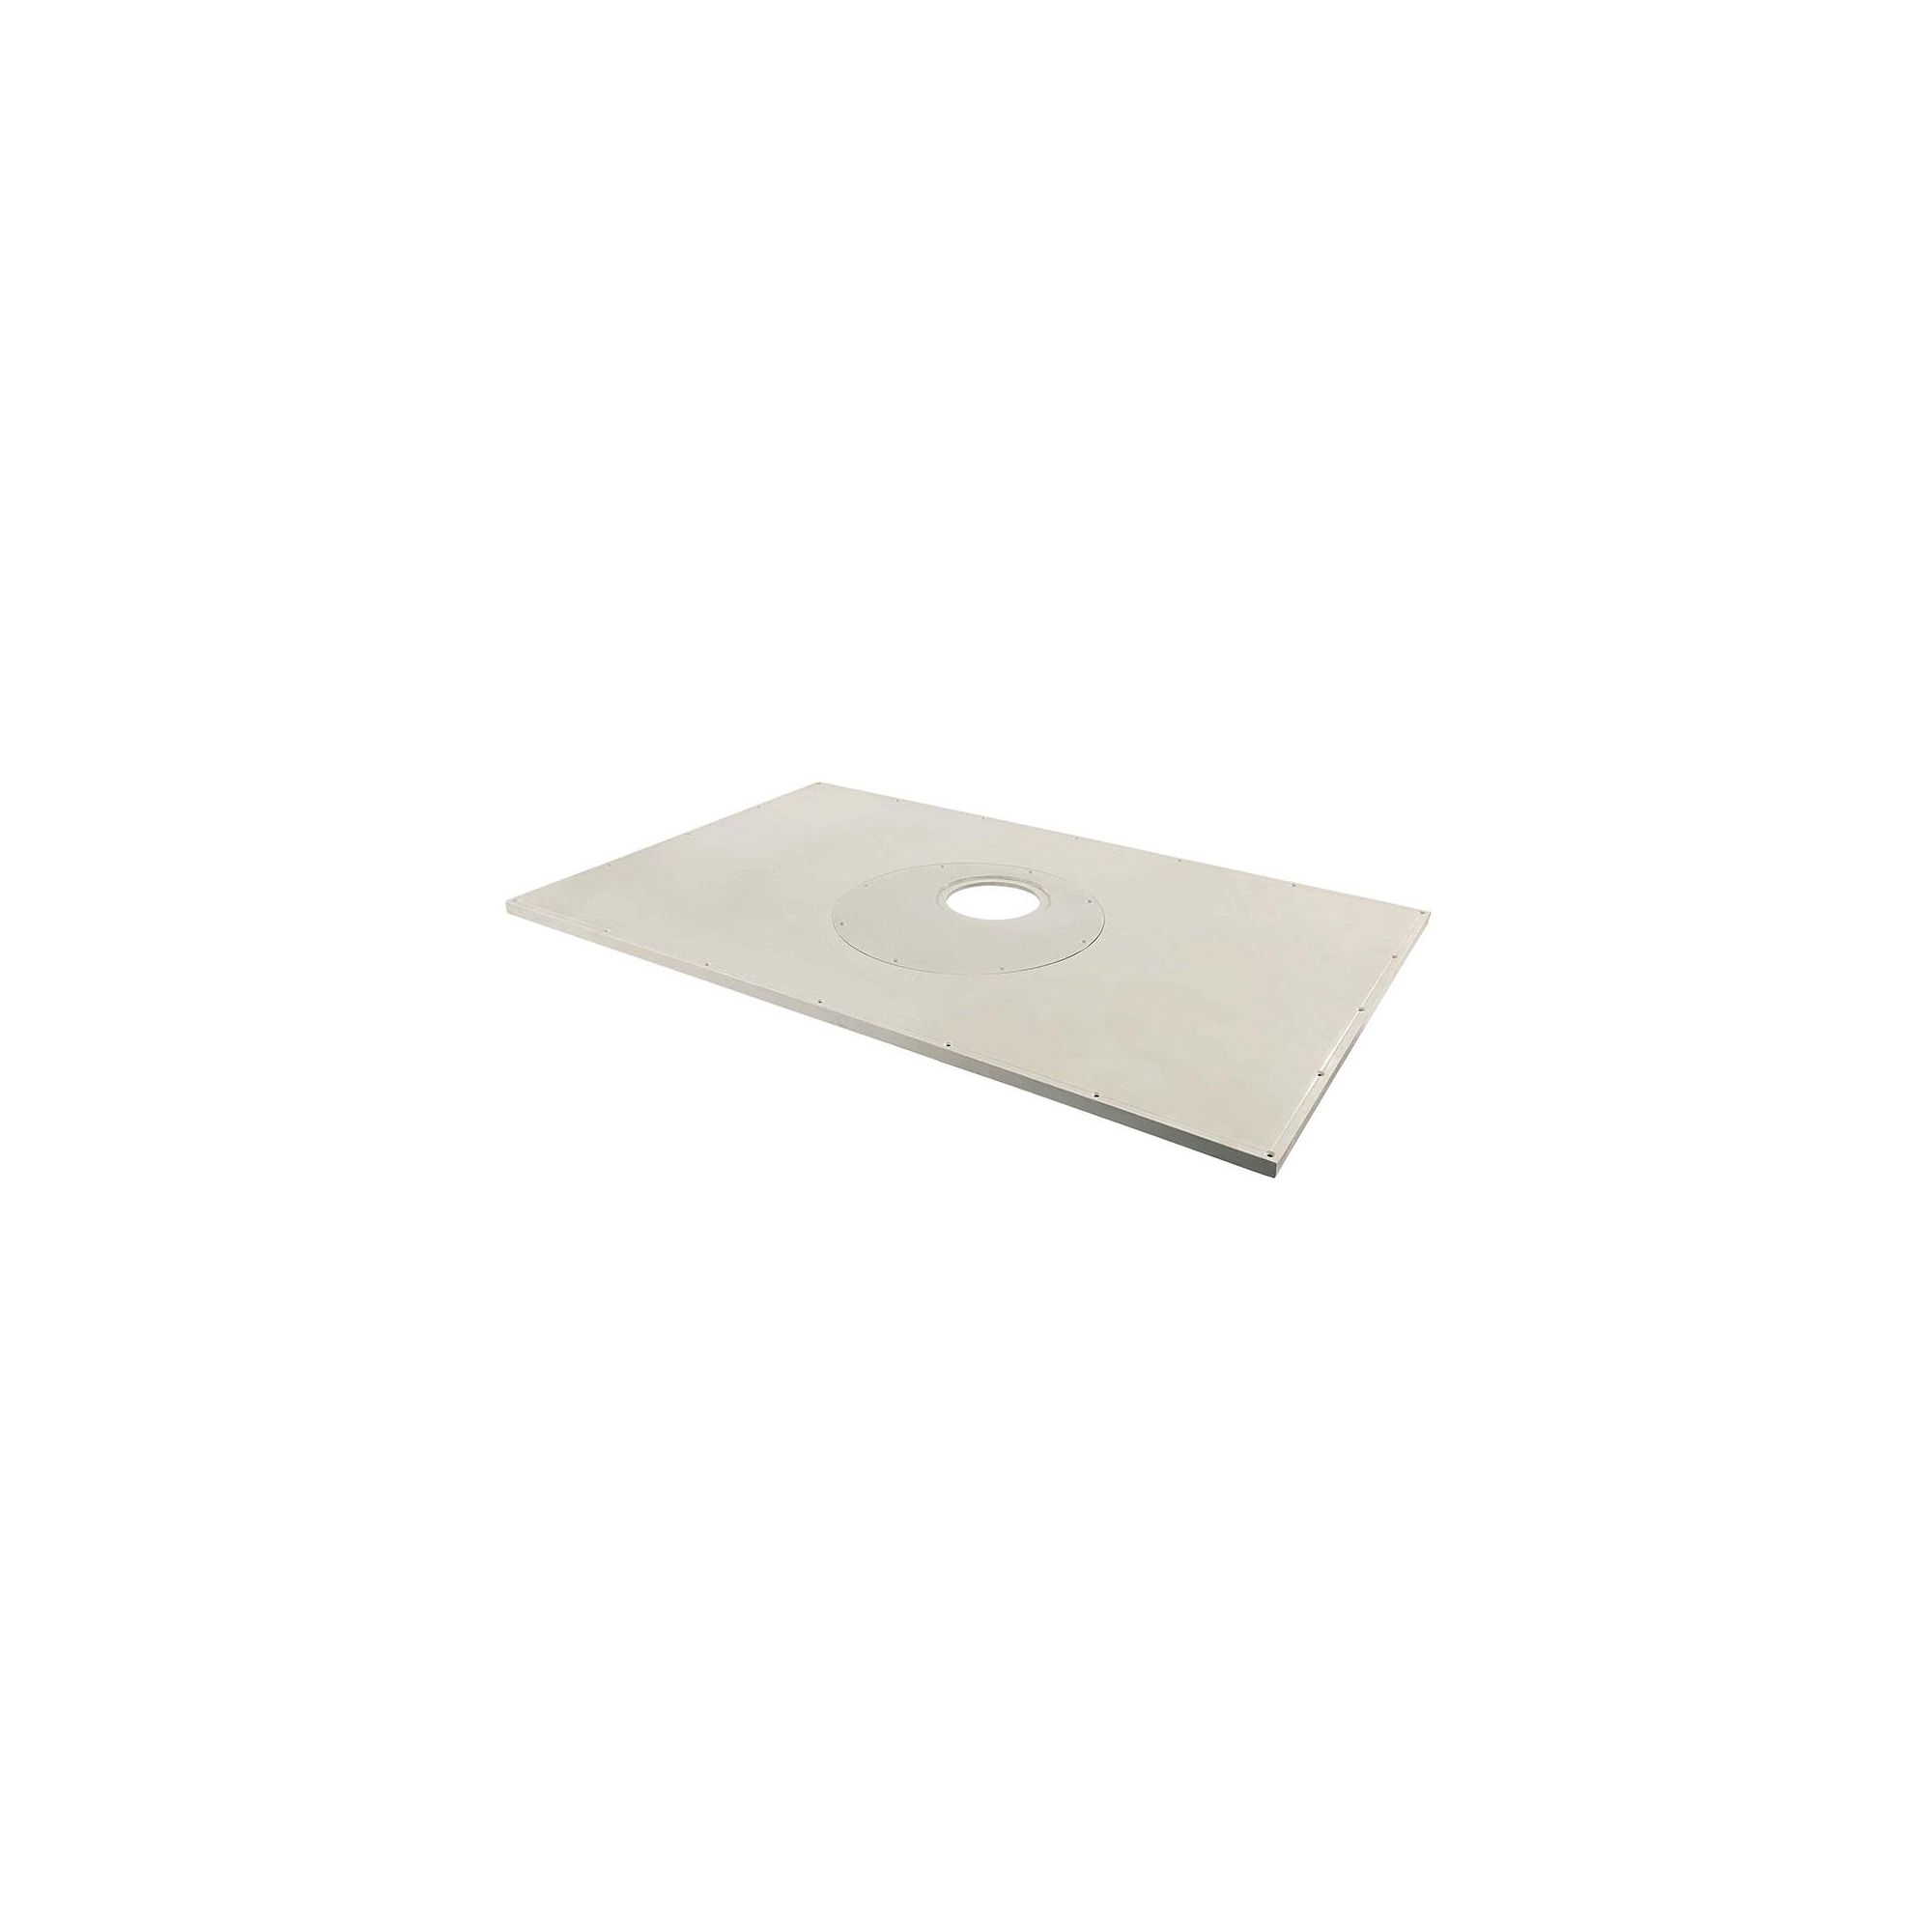 Impey Level-Dec Advance Wet Room Floor Former 1200mm x 900mm at Tesco Direct